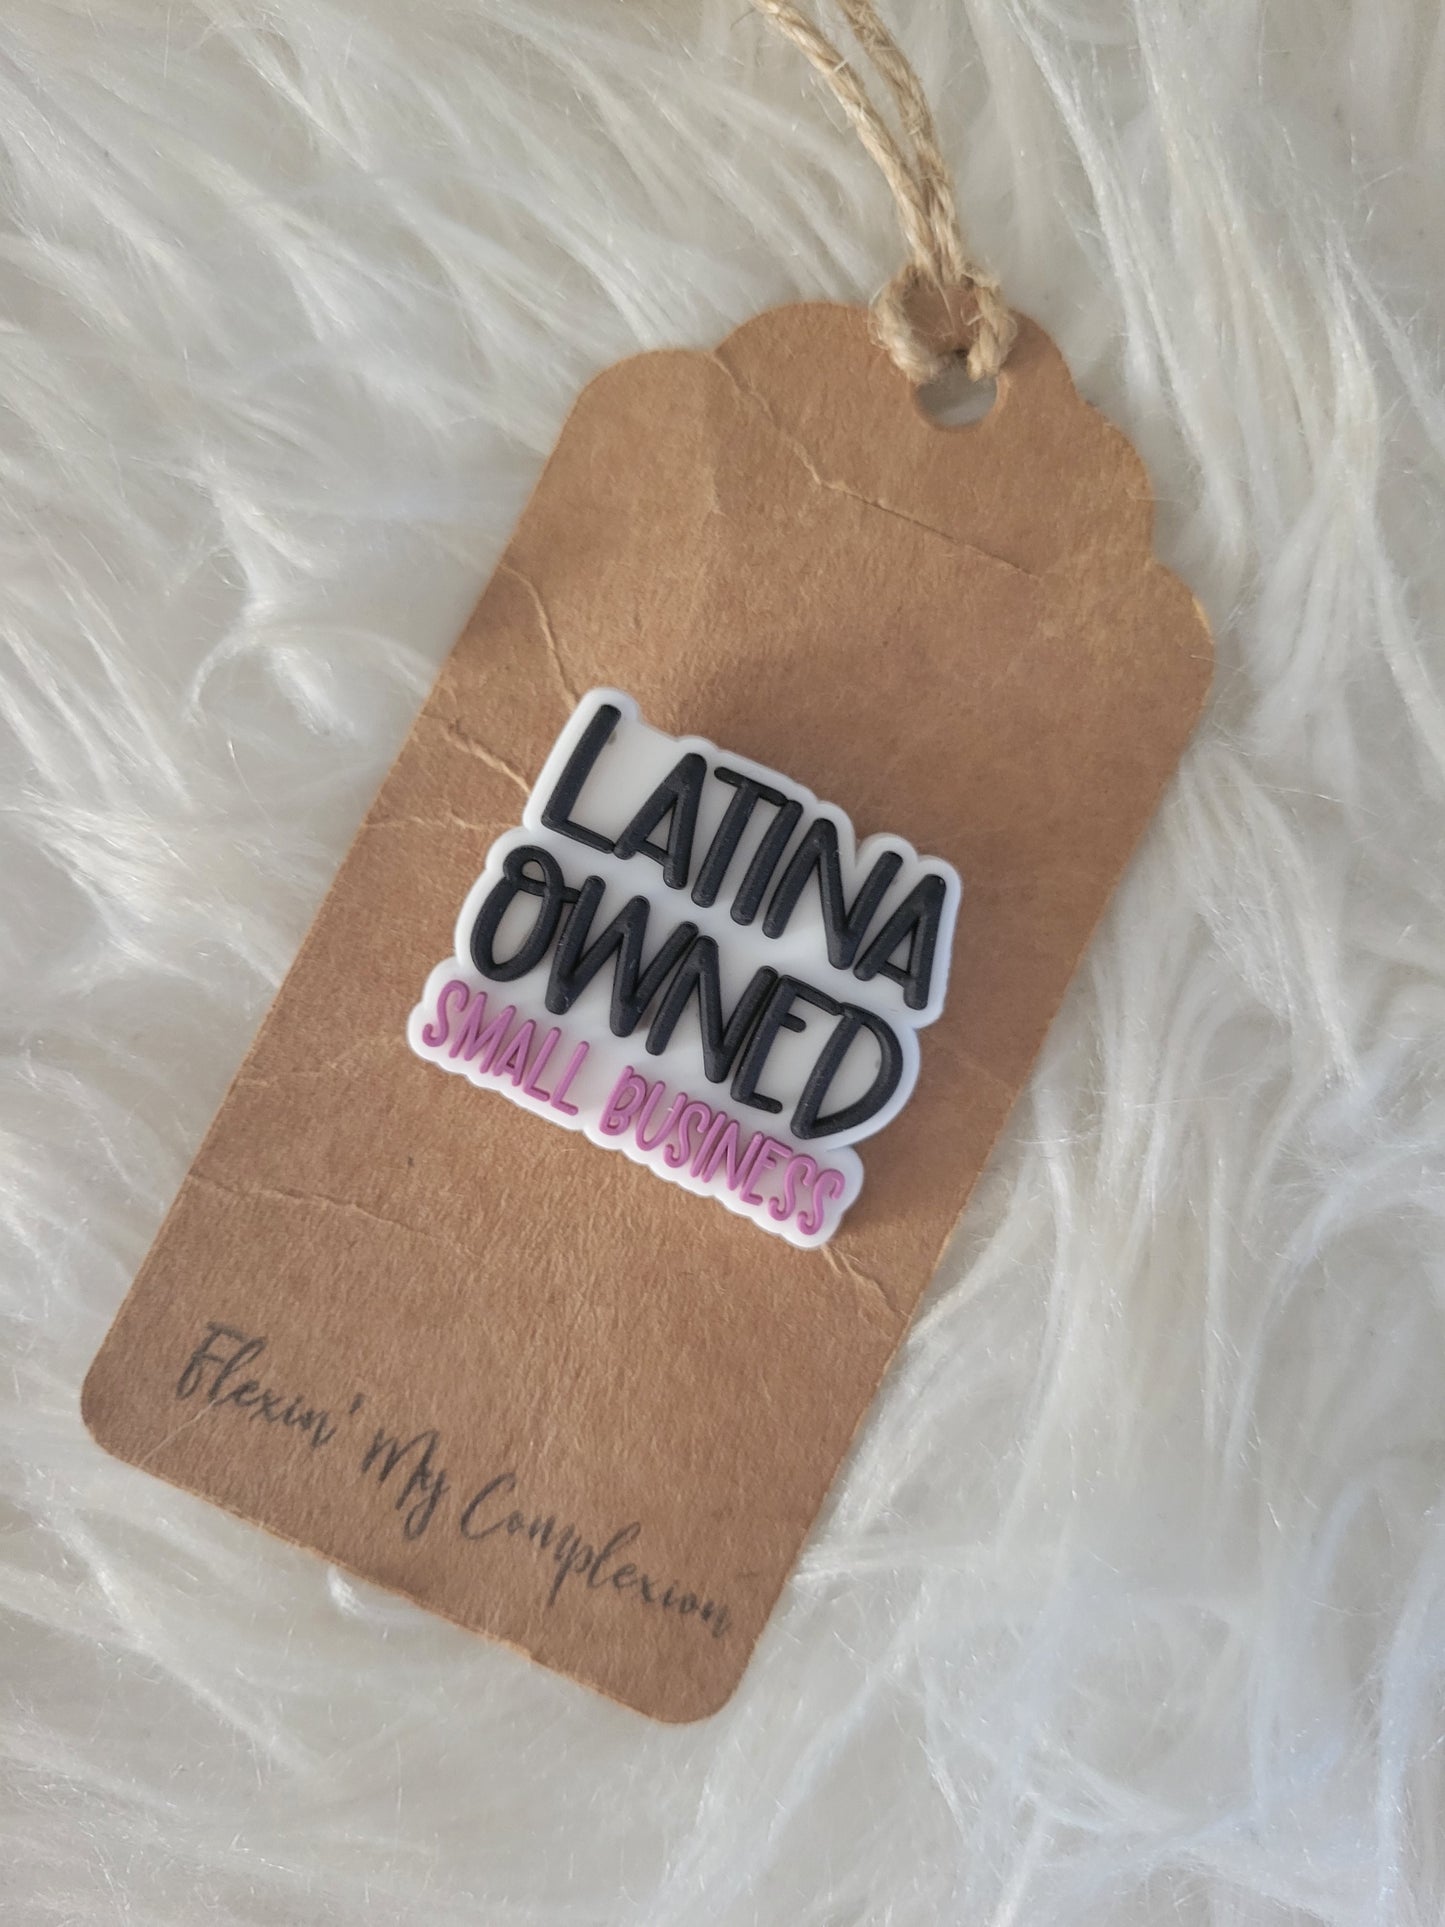 Latina Owned Small Business